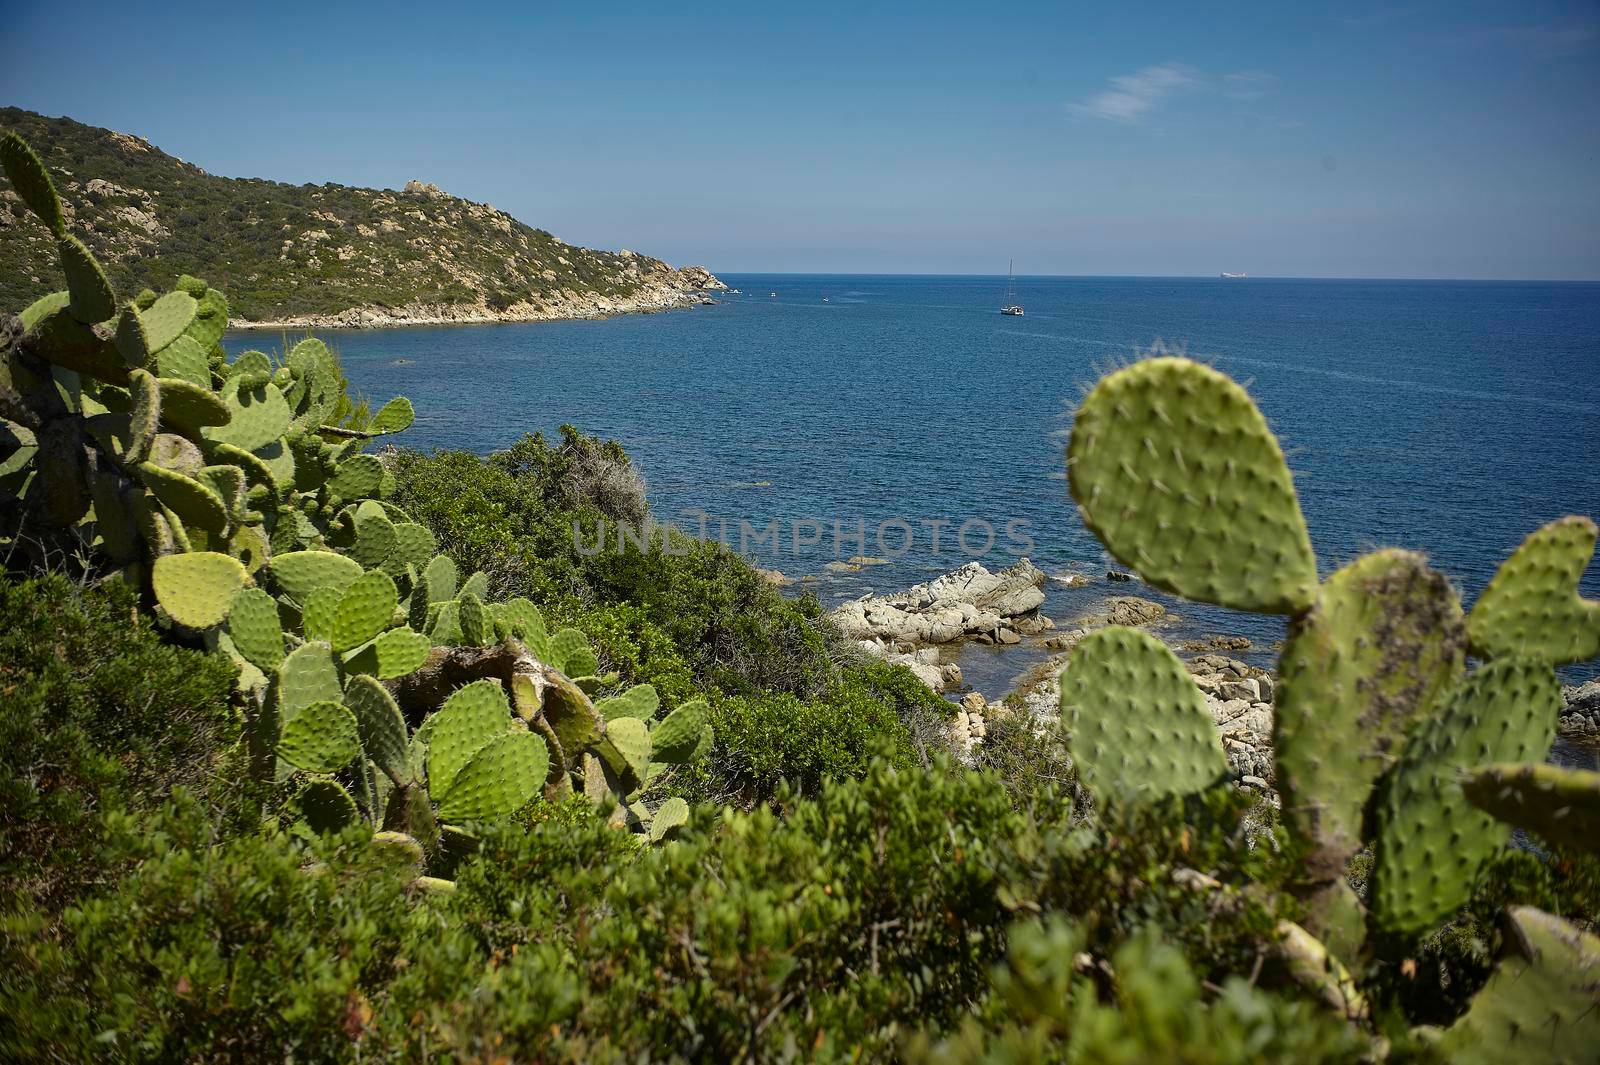 Some prickly pears that grow along the south coast of Sardinia in a promontory that merges on the blue sea.